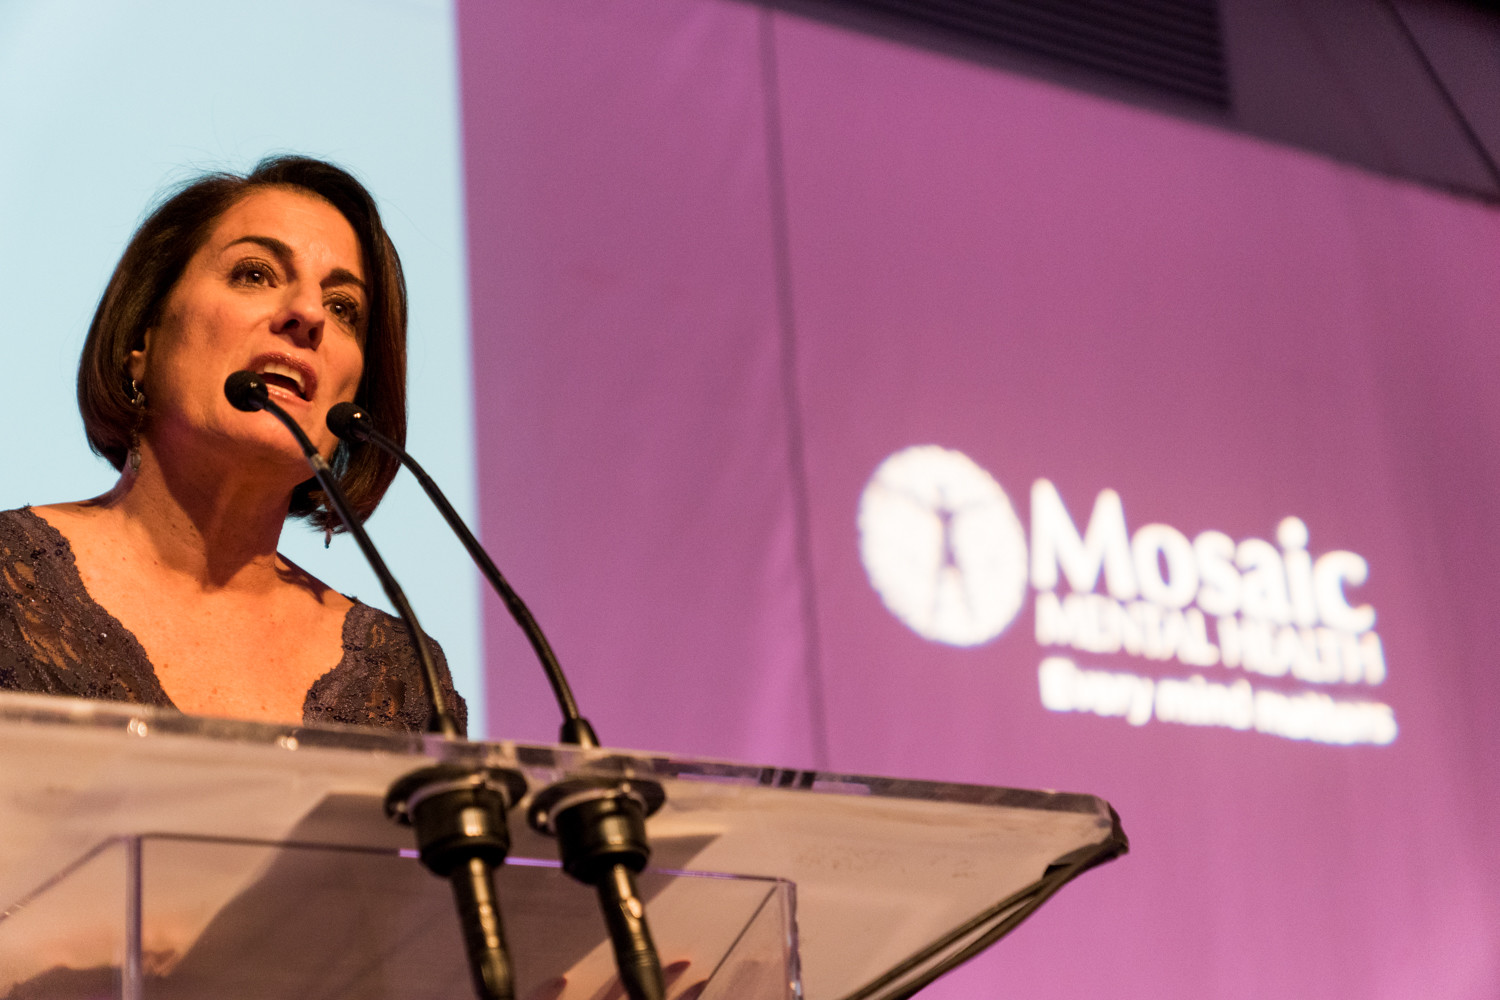 'We serve people from cradle to grave,' said Donna Demetri Friedman, the executive director of Mosaic Mental Health, at a gala celebrating the organization's rebranding. Some of its program includes on-site clinics, consultations at local public schools and vocational services.